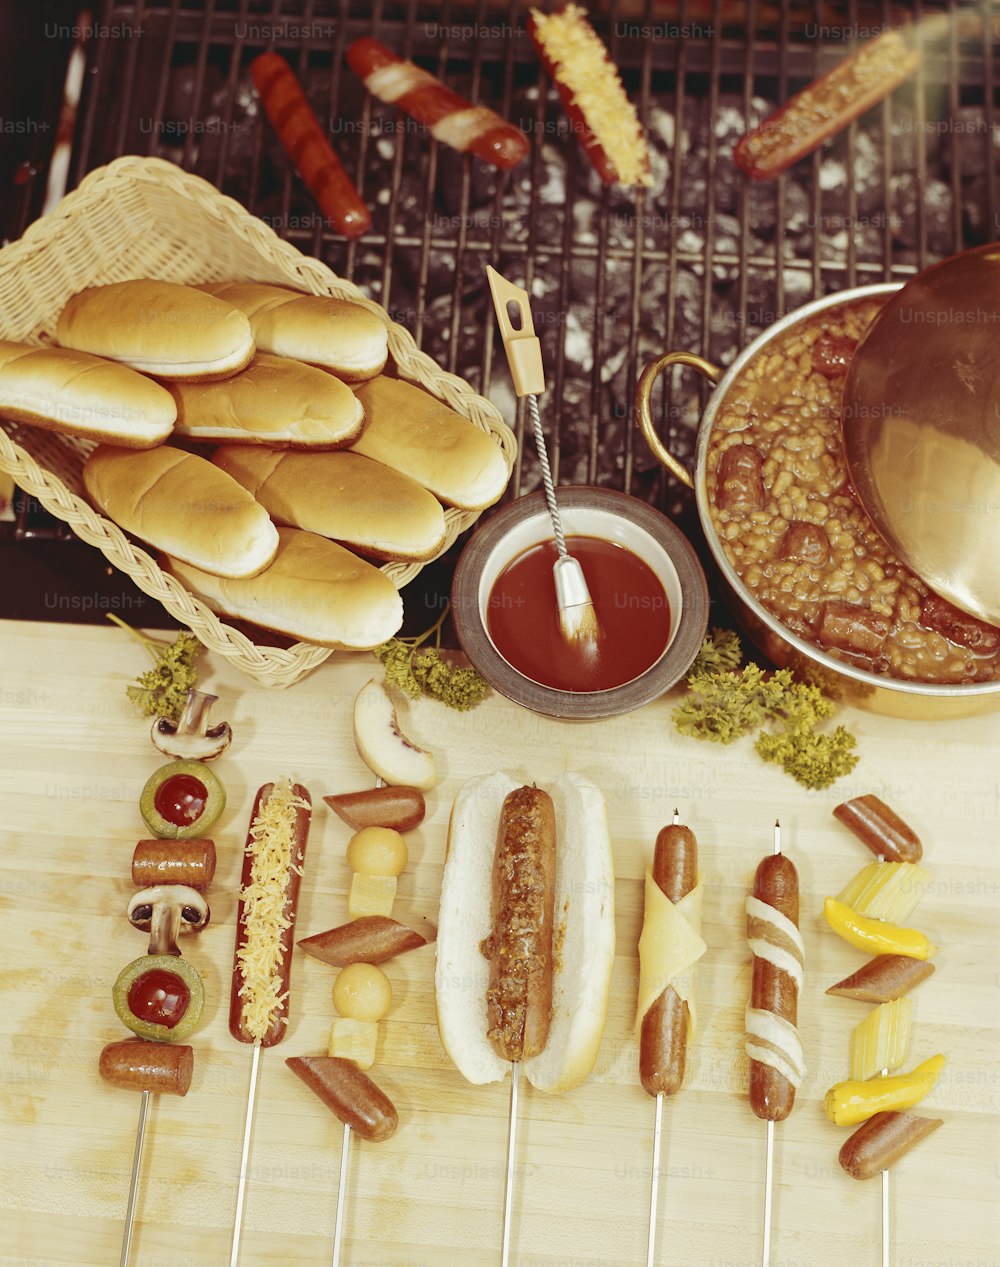 hotdogs, corn dogs, and other foods on a grill